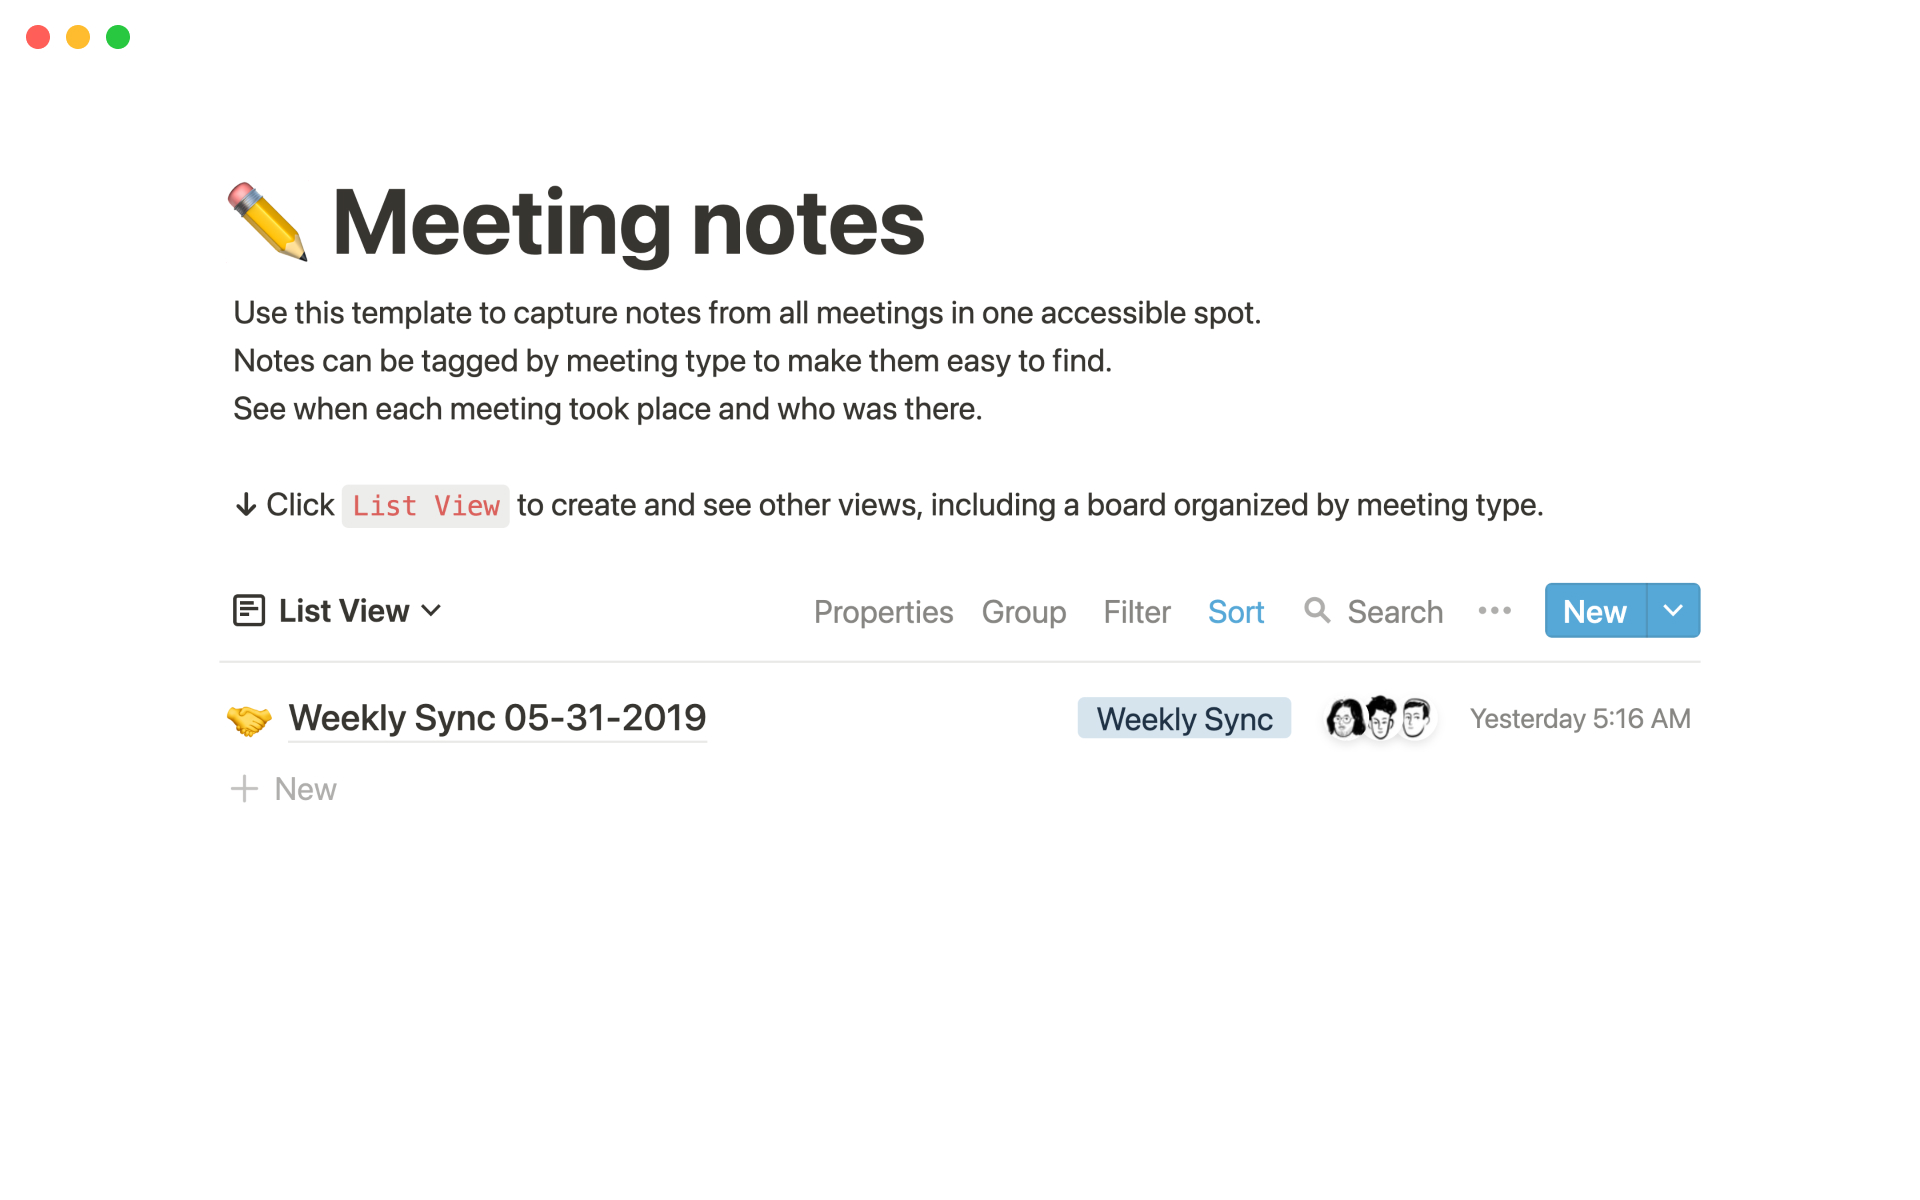 Capture notes from all meetings in one accessible spot.